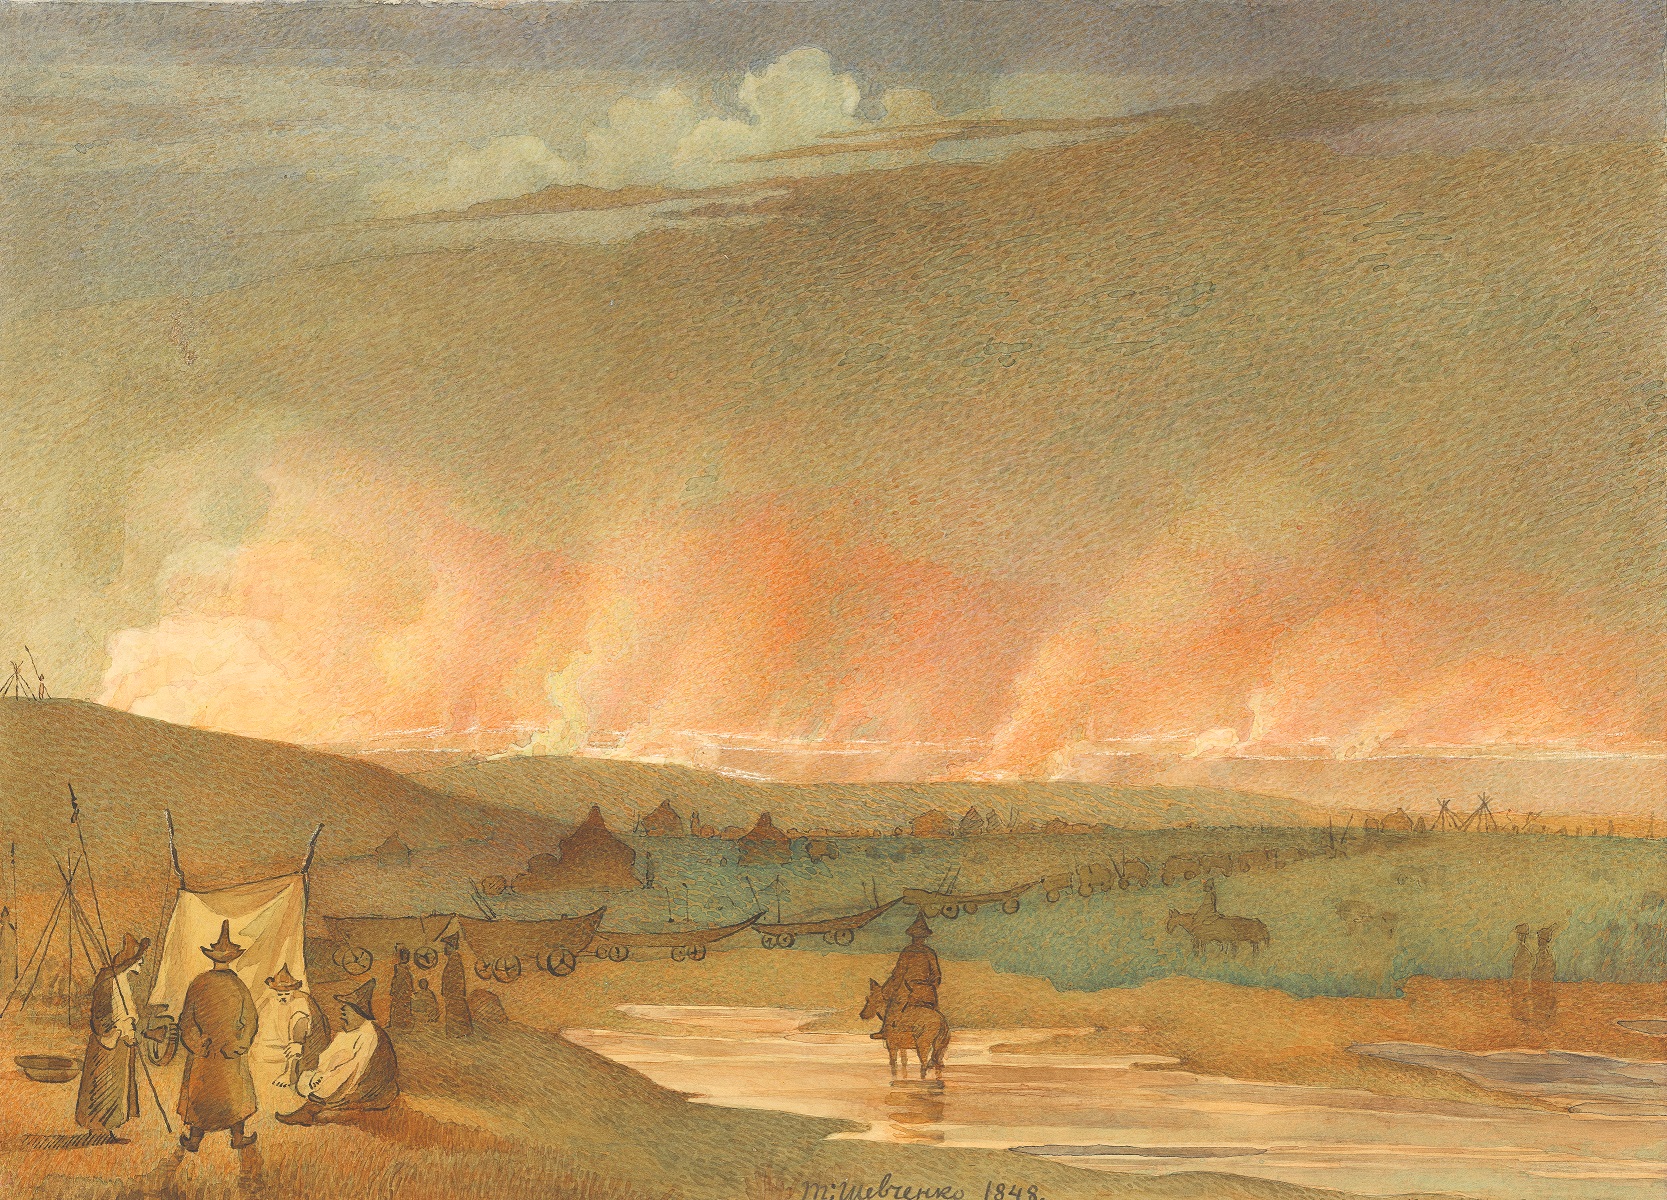 Fire in the Steppe, 1848, watercolour